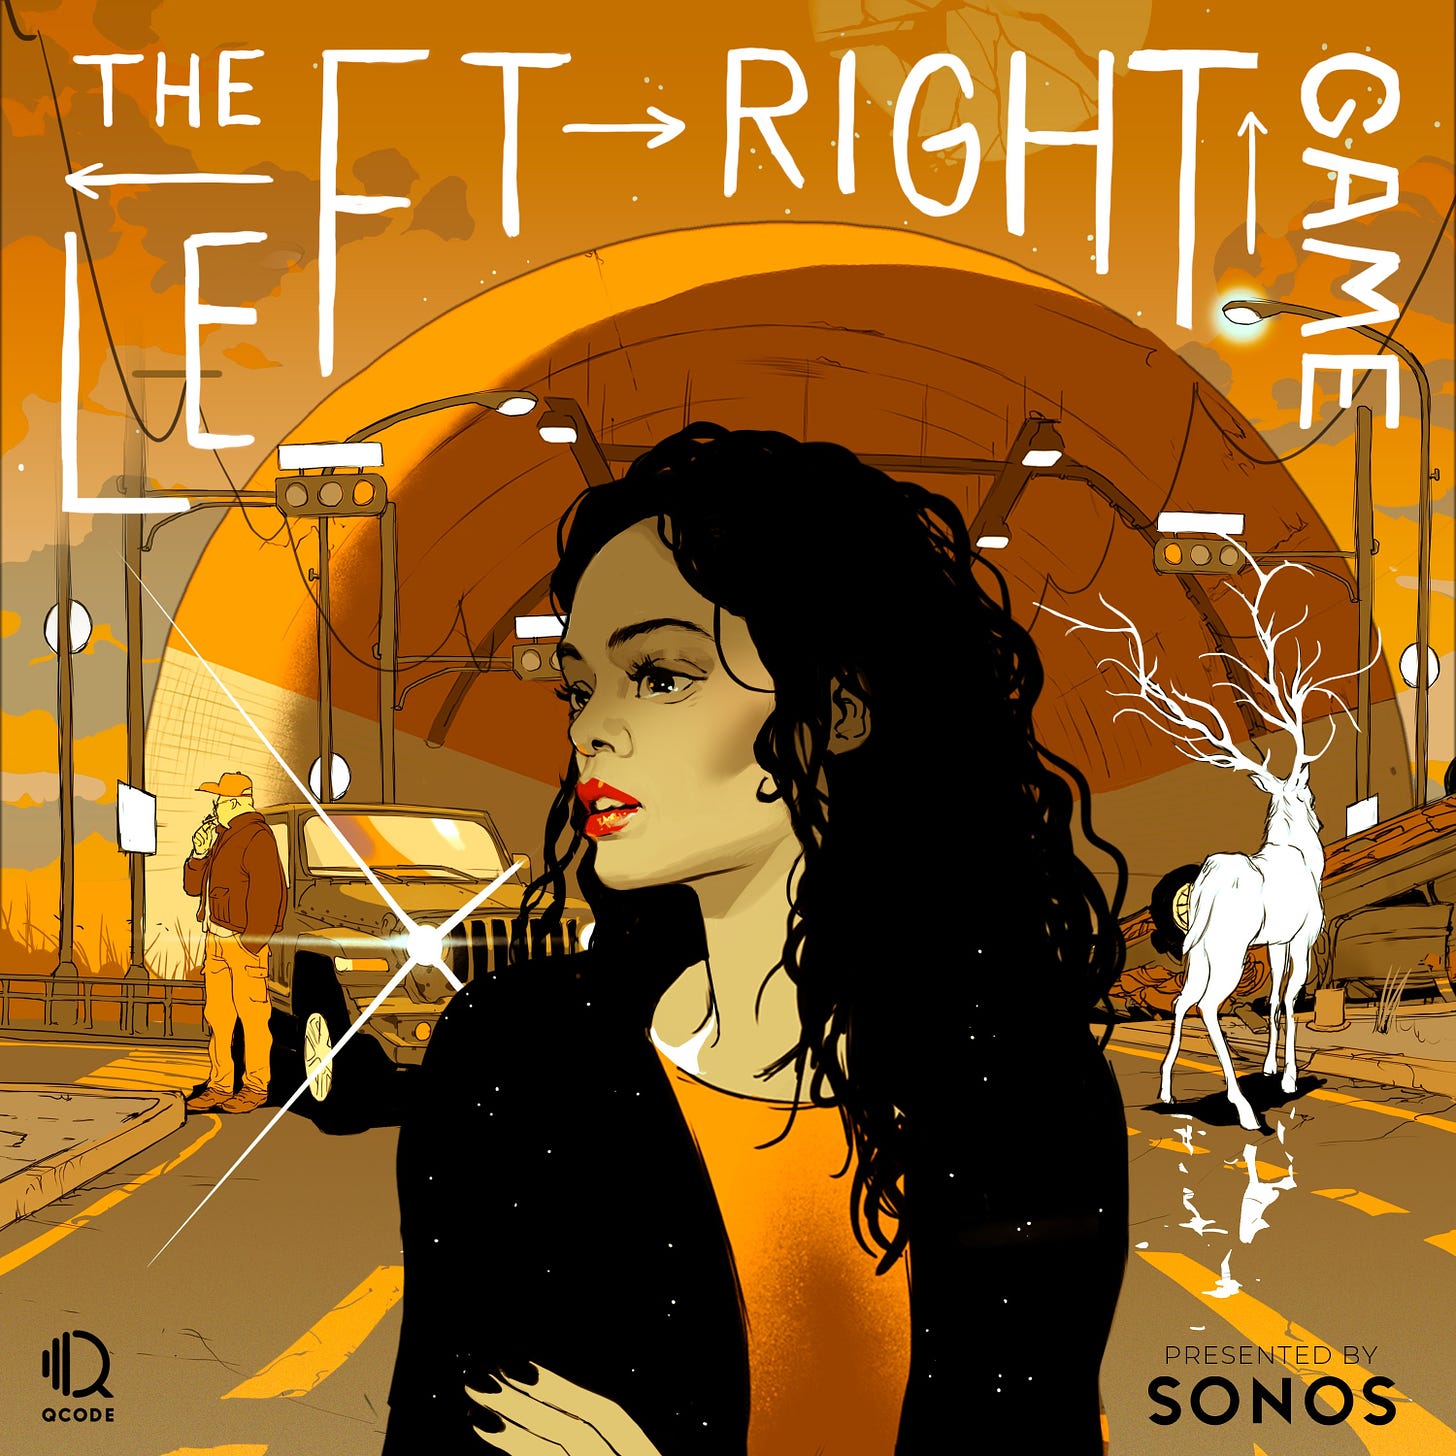 The Left Right Game (Podcast Series 2020– ) - IMDb